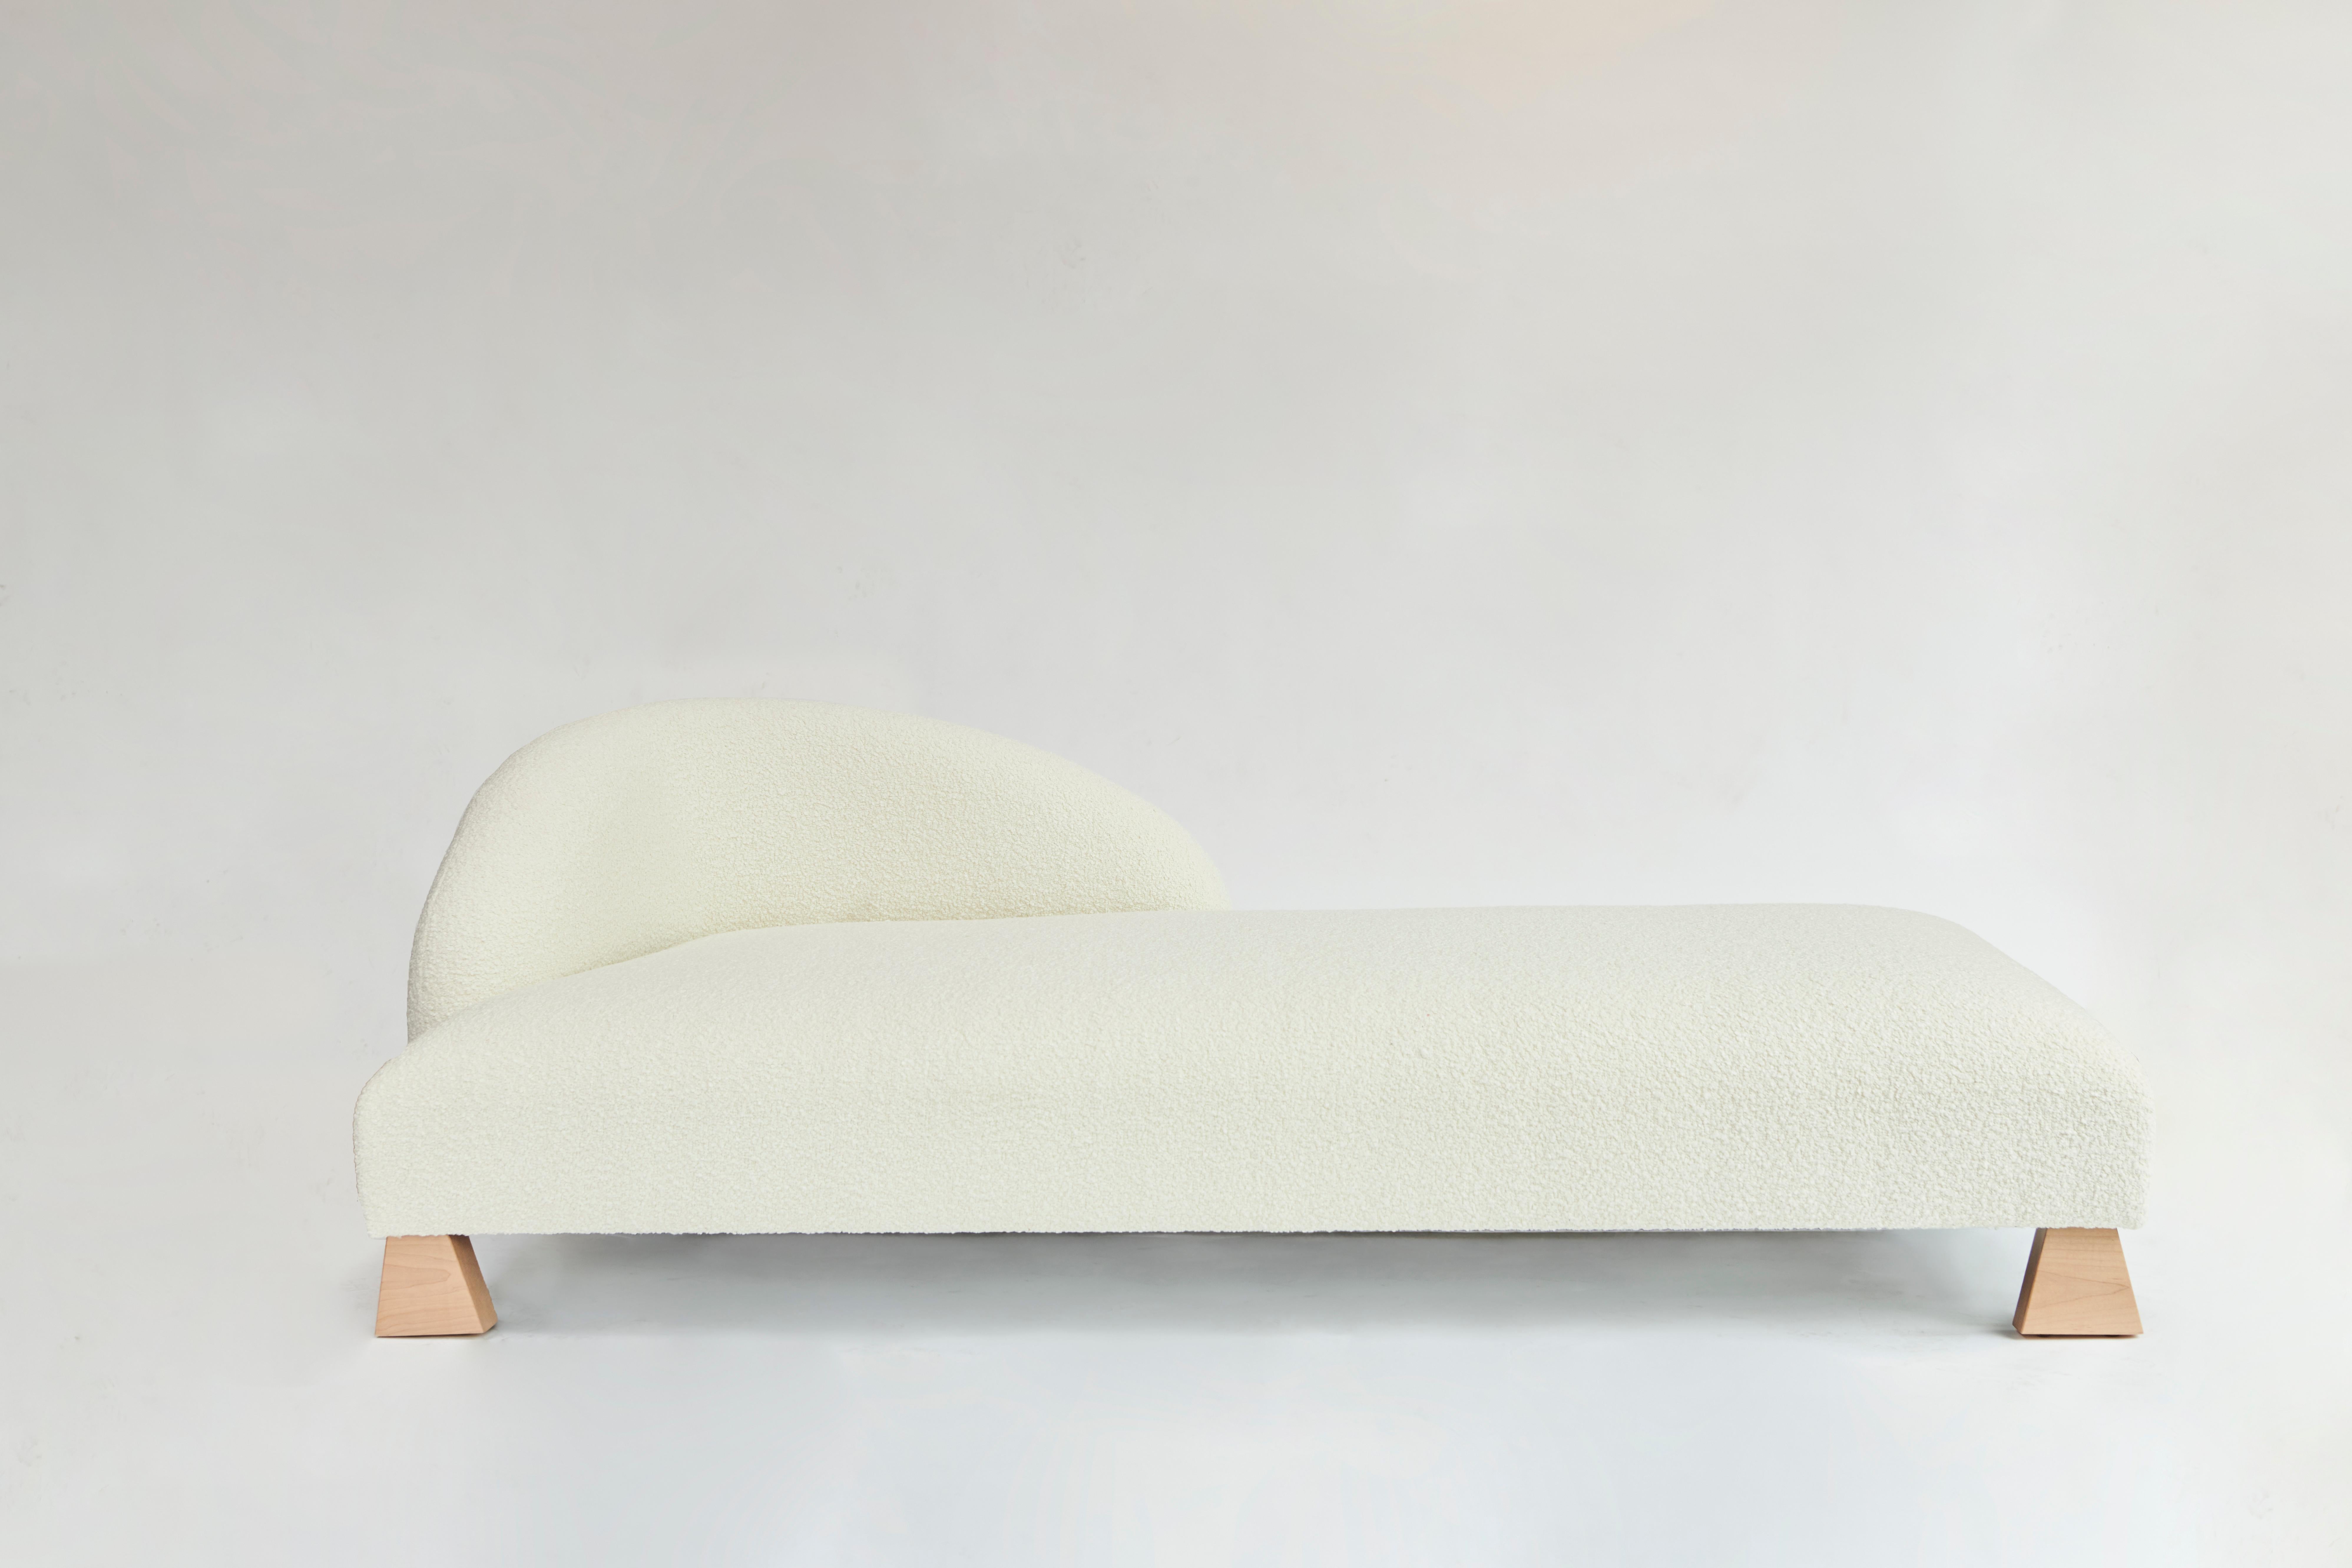 Made to order ivory bouclé chaise designed by Christian Siriano.

Fabric: Ivory Bouclé  (available in custom fabric)
Base: Natural Maple (available in custom finish)

Dimensions:
Overall Width: 80.5”
Overall Depth: 39.5” 
Overall Height: 27”
Seat